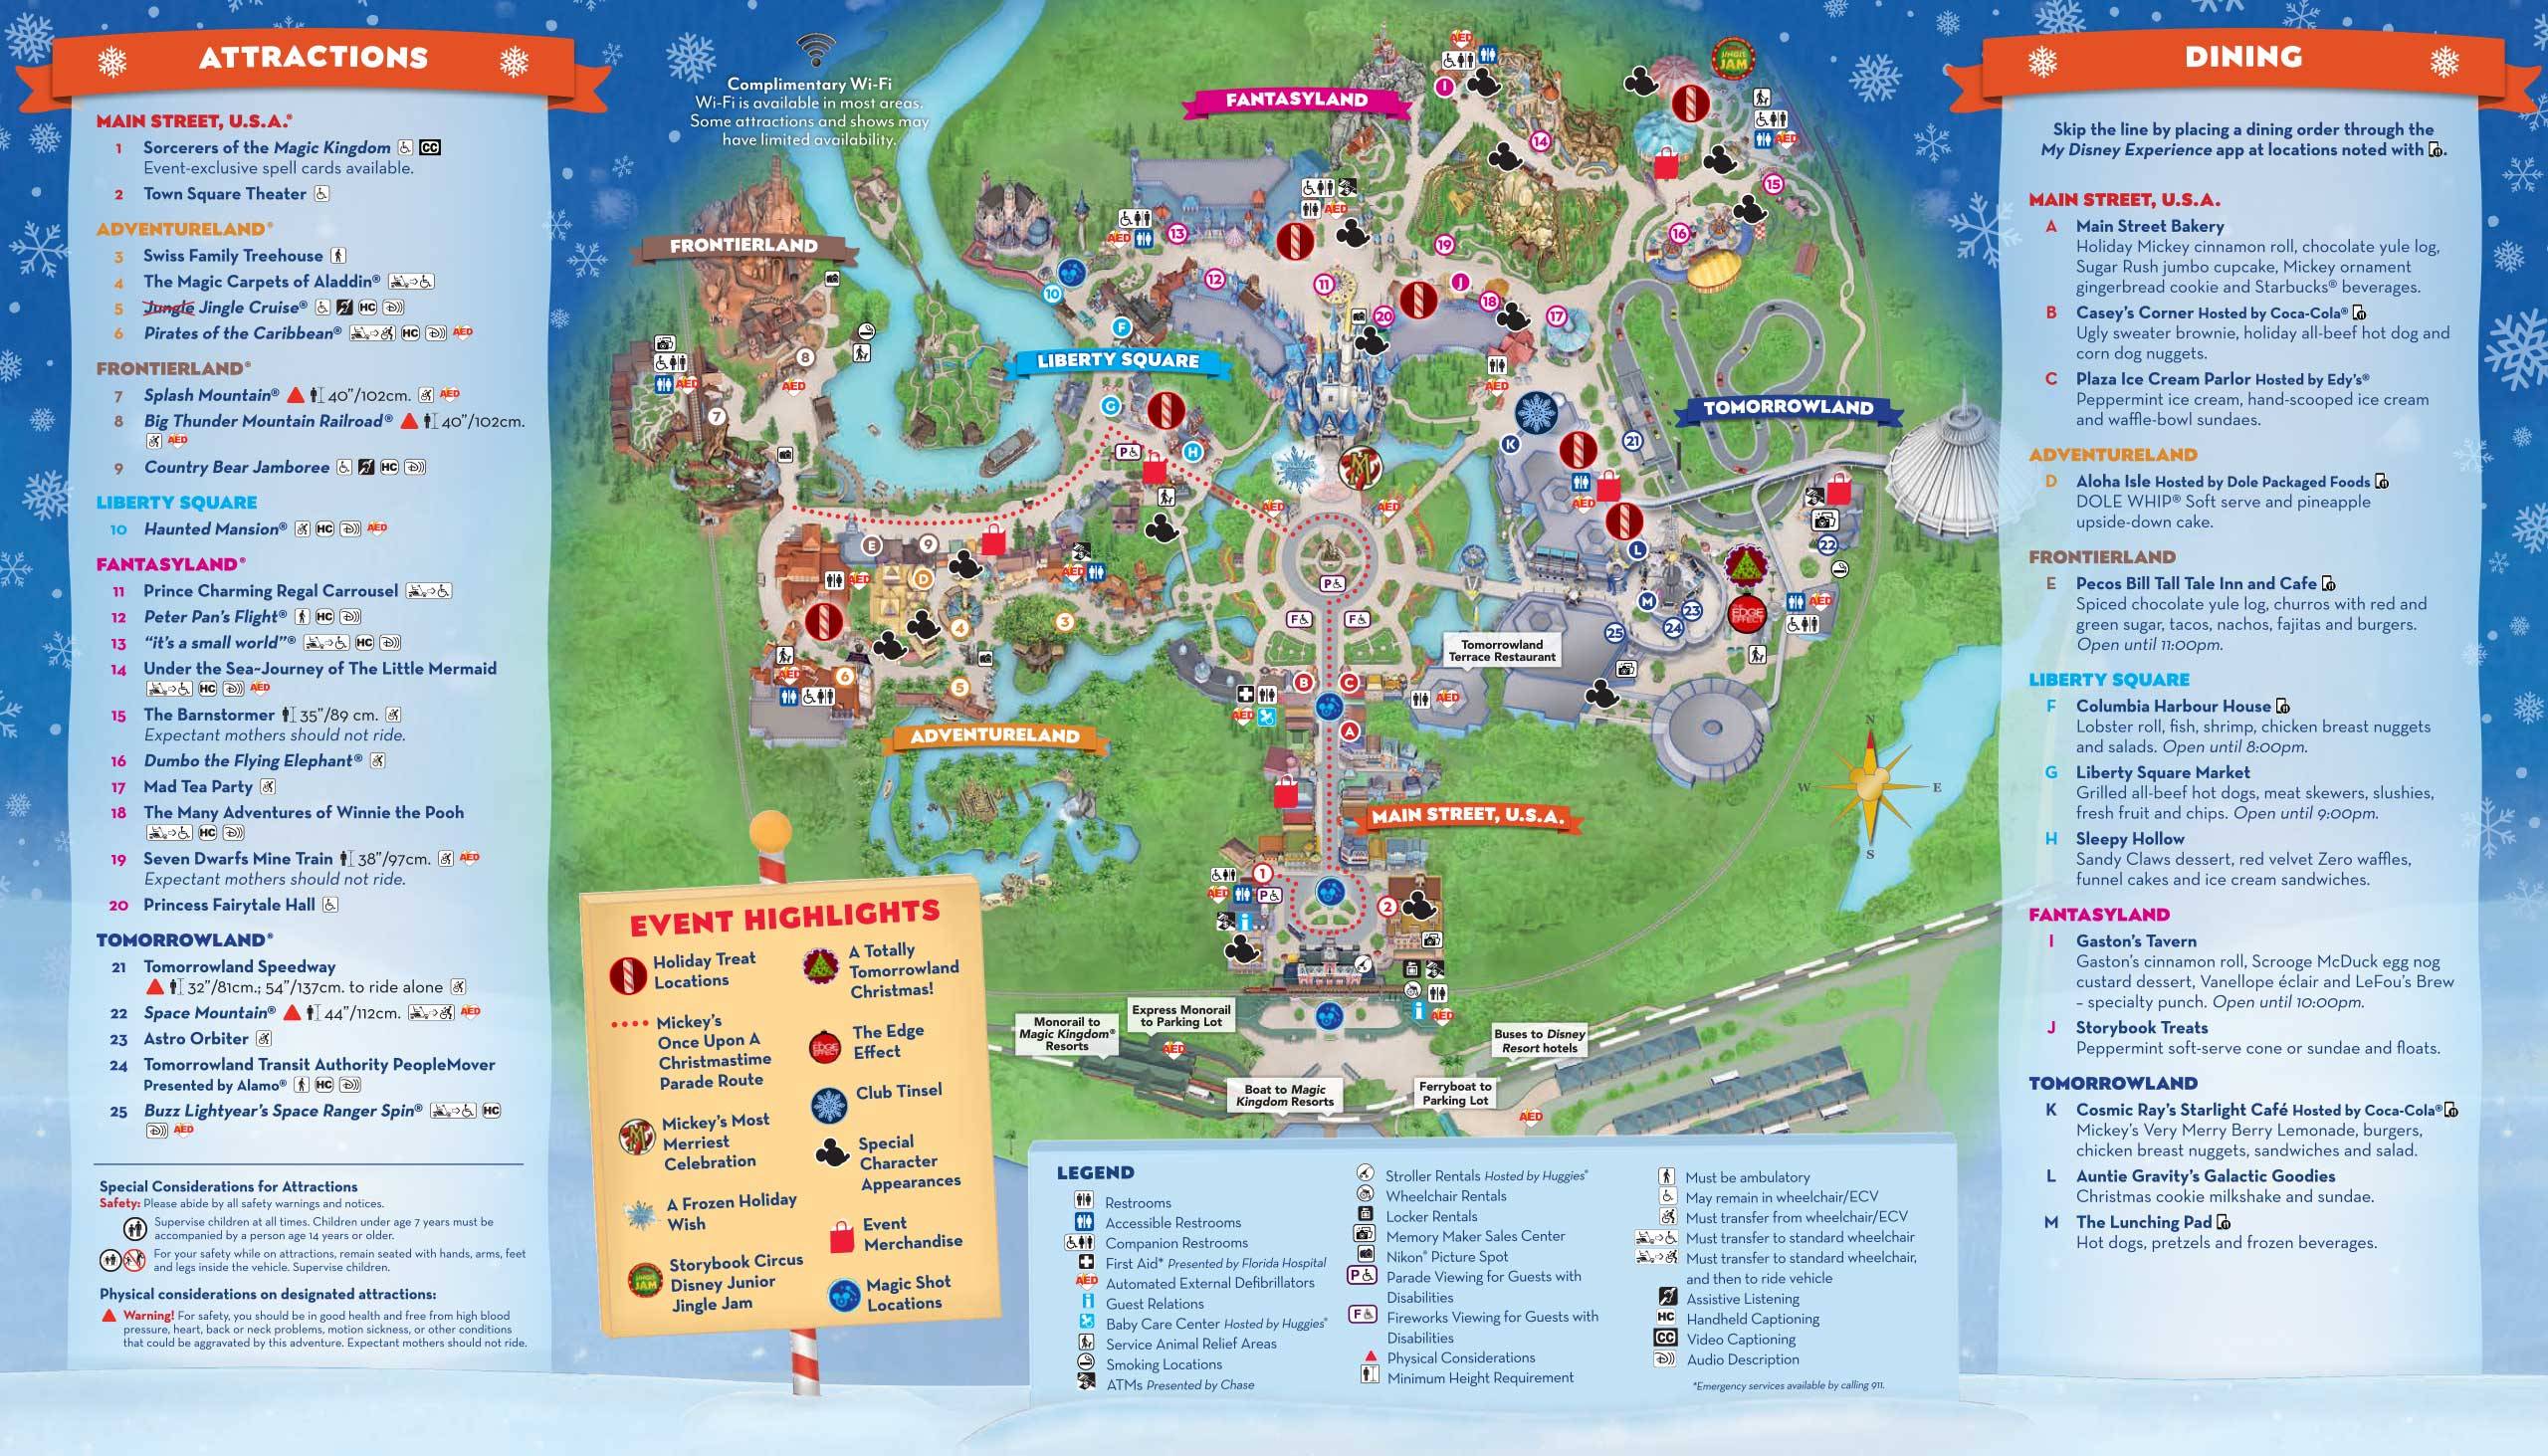 Mickey's Very Merry Christmas Party 2018 guide map - back